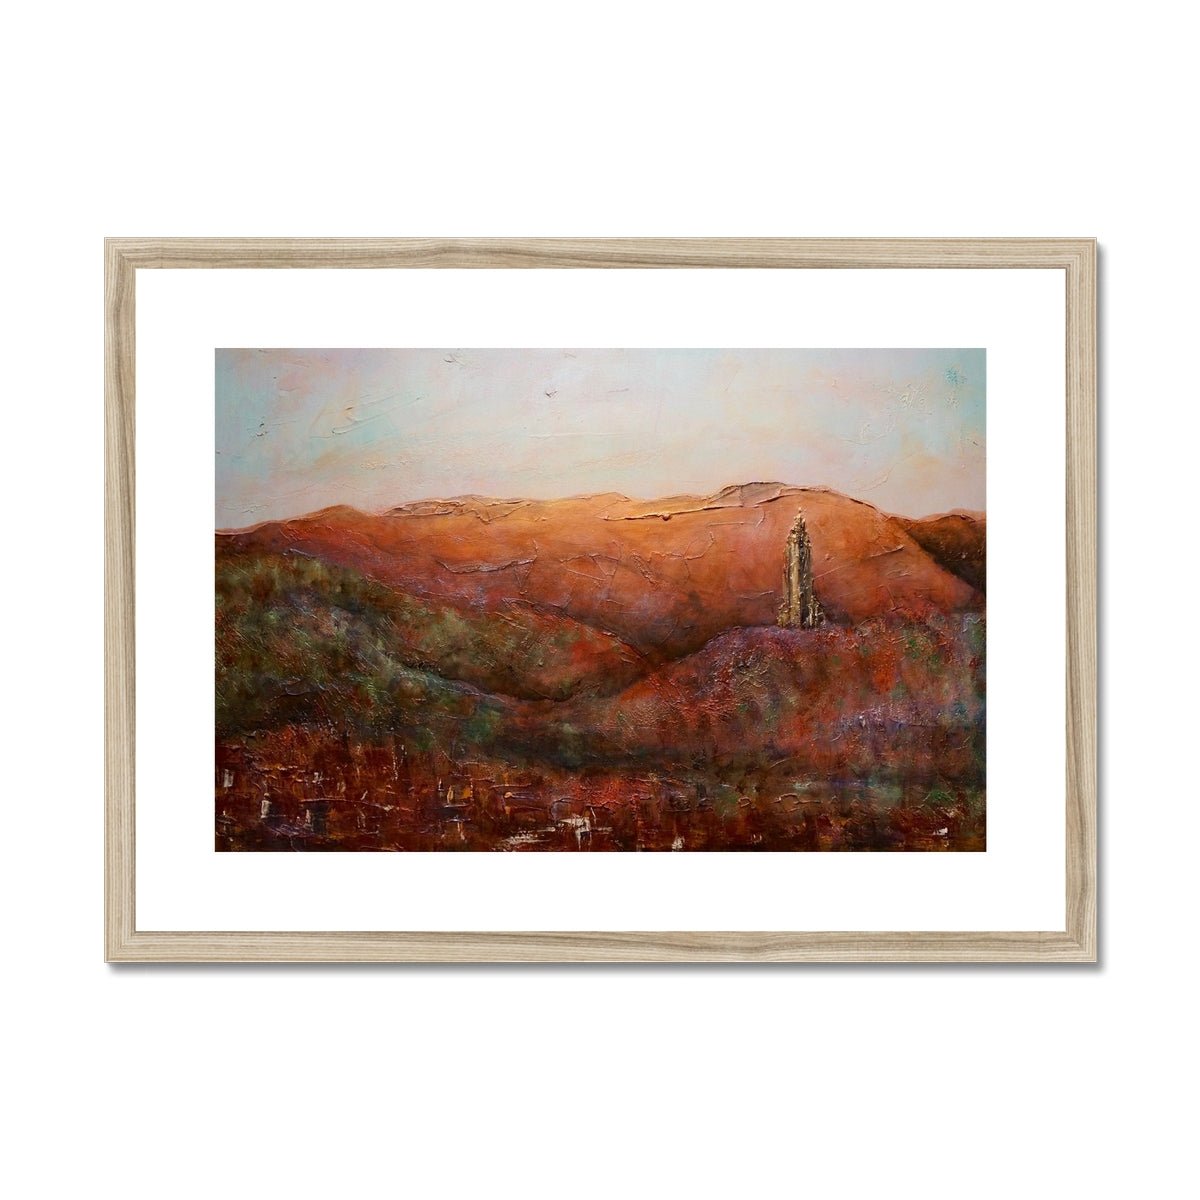 The Wallace Monument Painting | Framed & Mounted Prints From Scotland-Framed & Mounted Prints-Historic & Iconic Scotland Art Gallery-A2 Landscape-Natural Frame-Paintings, Prints, Homeware, Art Gifts From Scotland By Scottish Artist Kevin Hunter